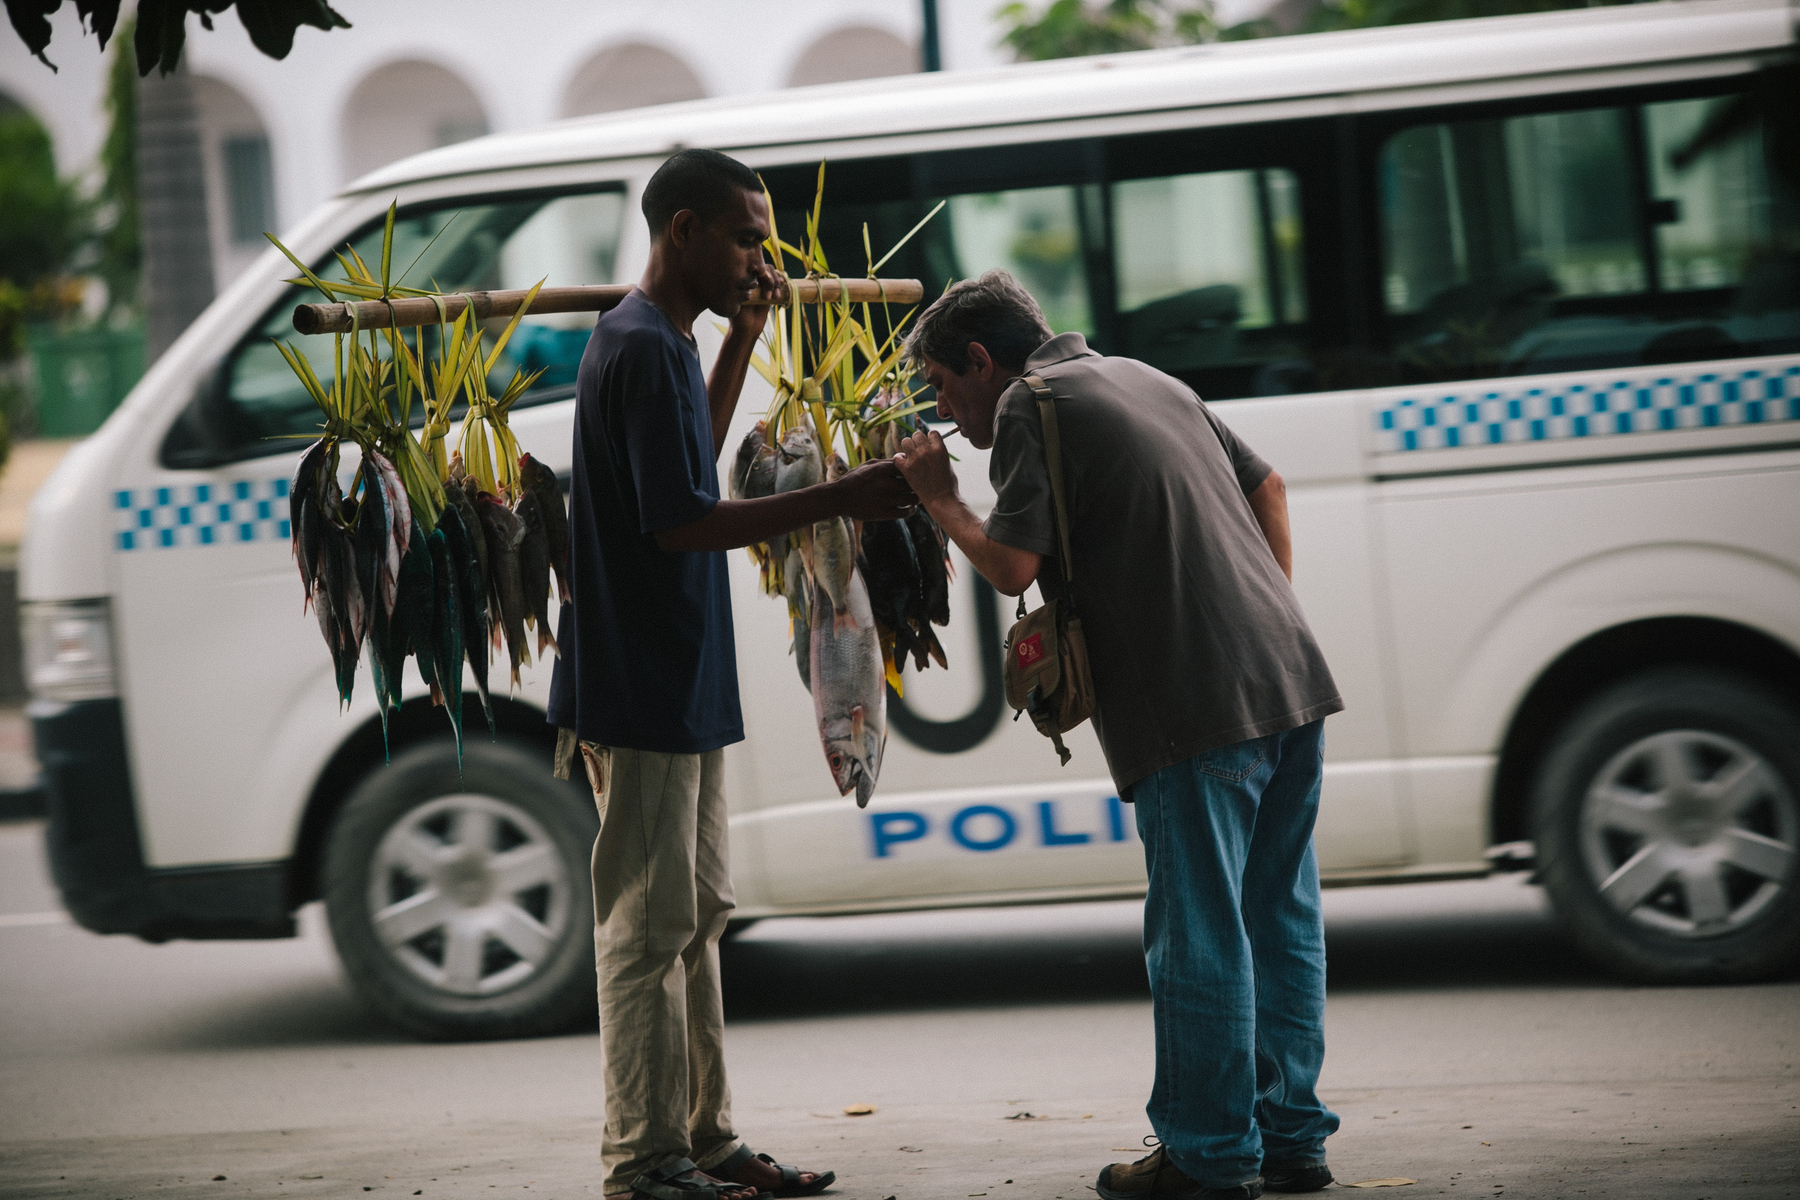 A man selling fish lights up a cigarette belonging to another man. A police van drives by. 